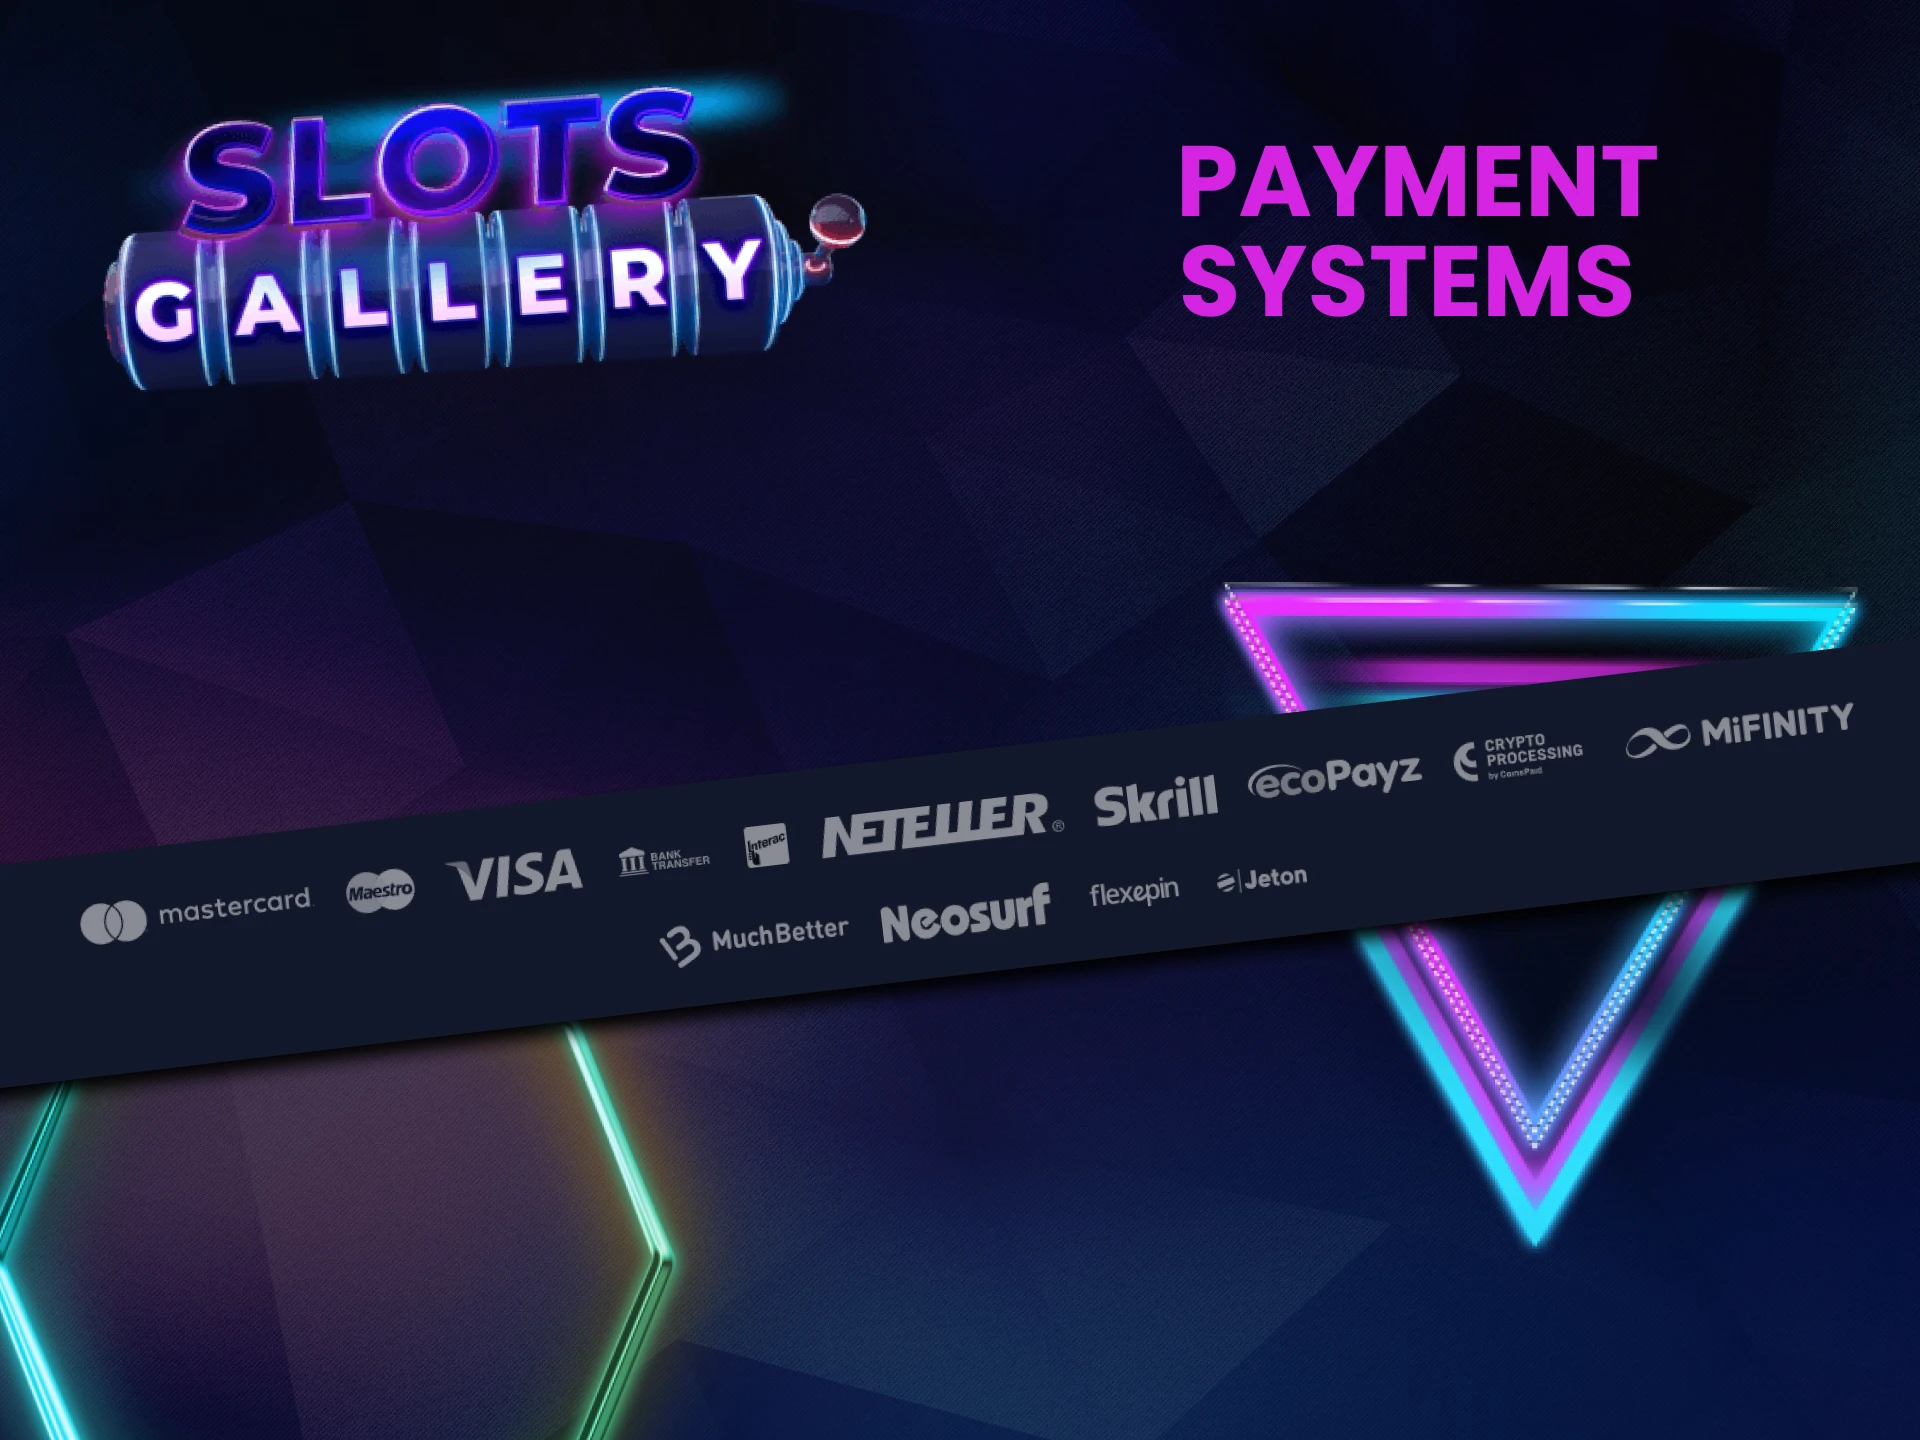 Find out what methods of depositing and withdrawing funds are available on Slots Gallery.